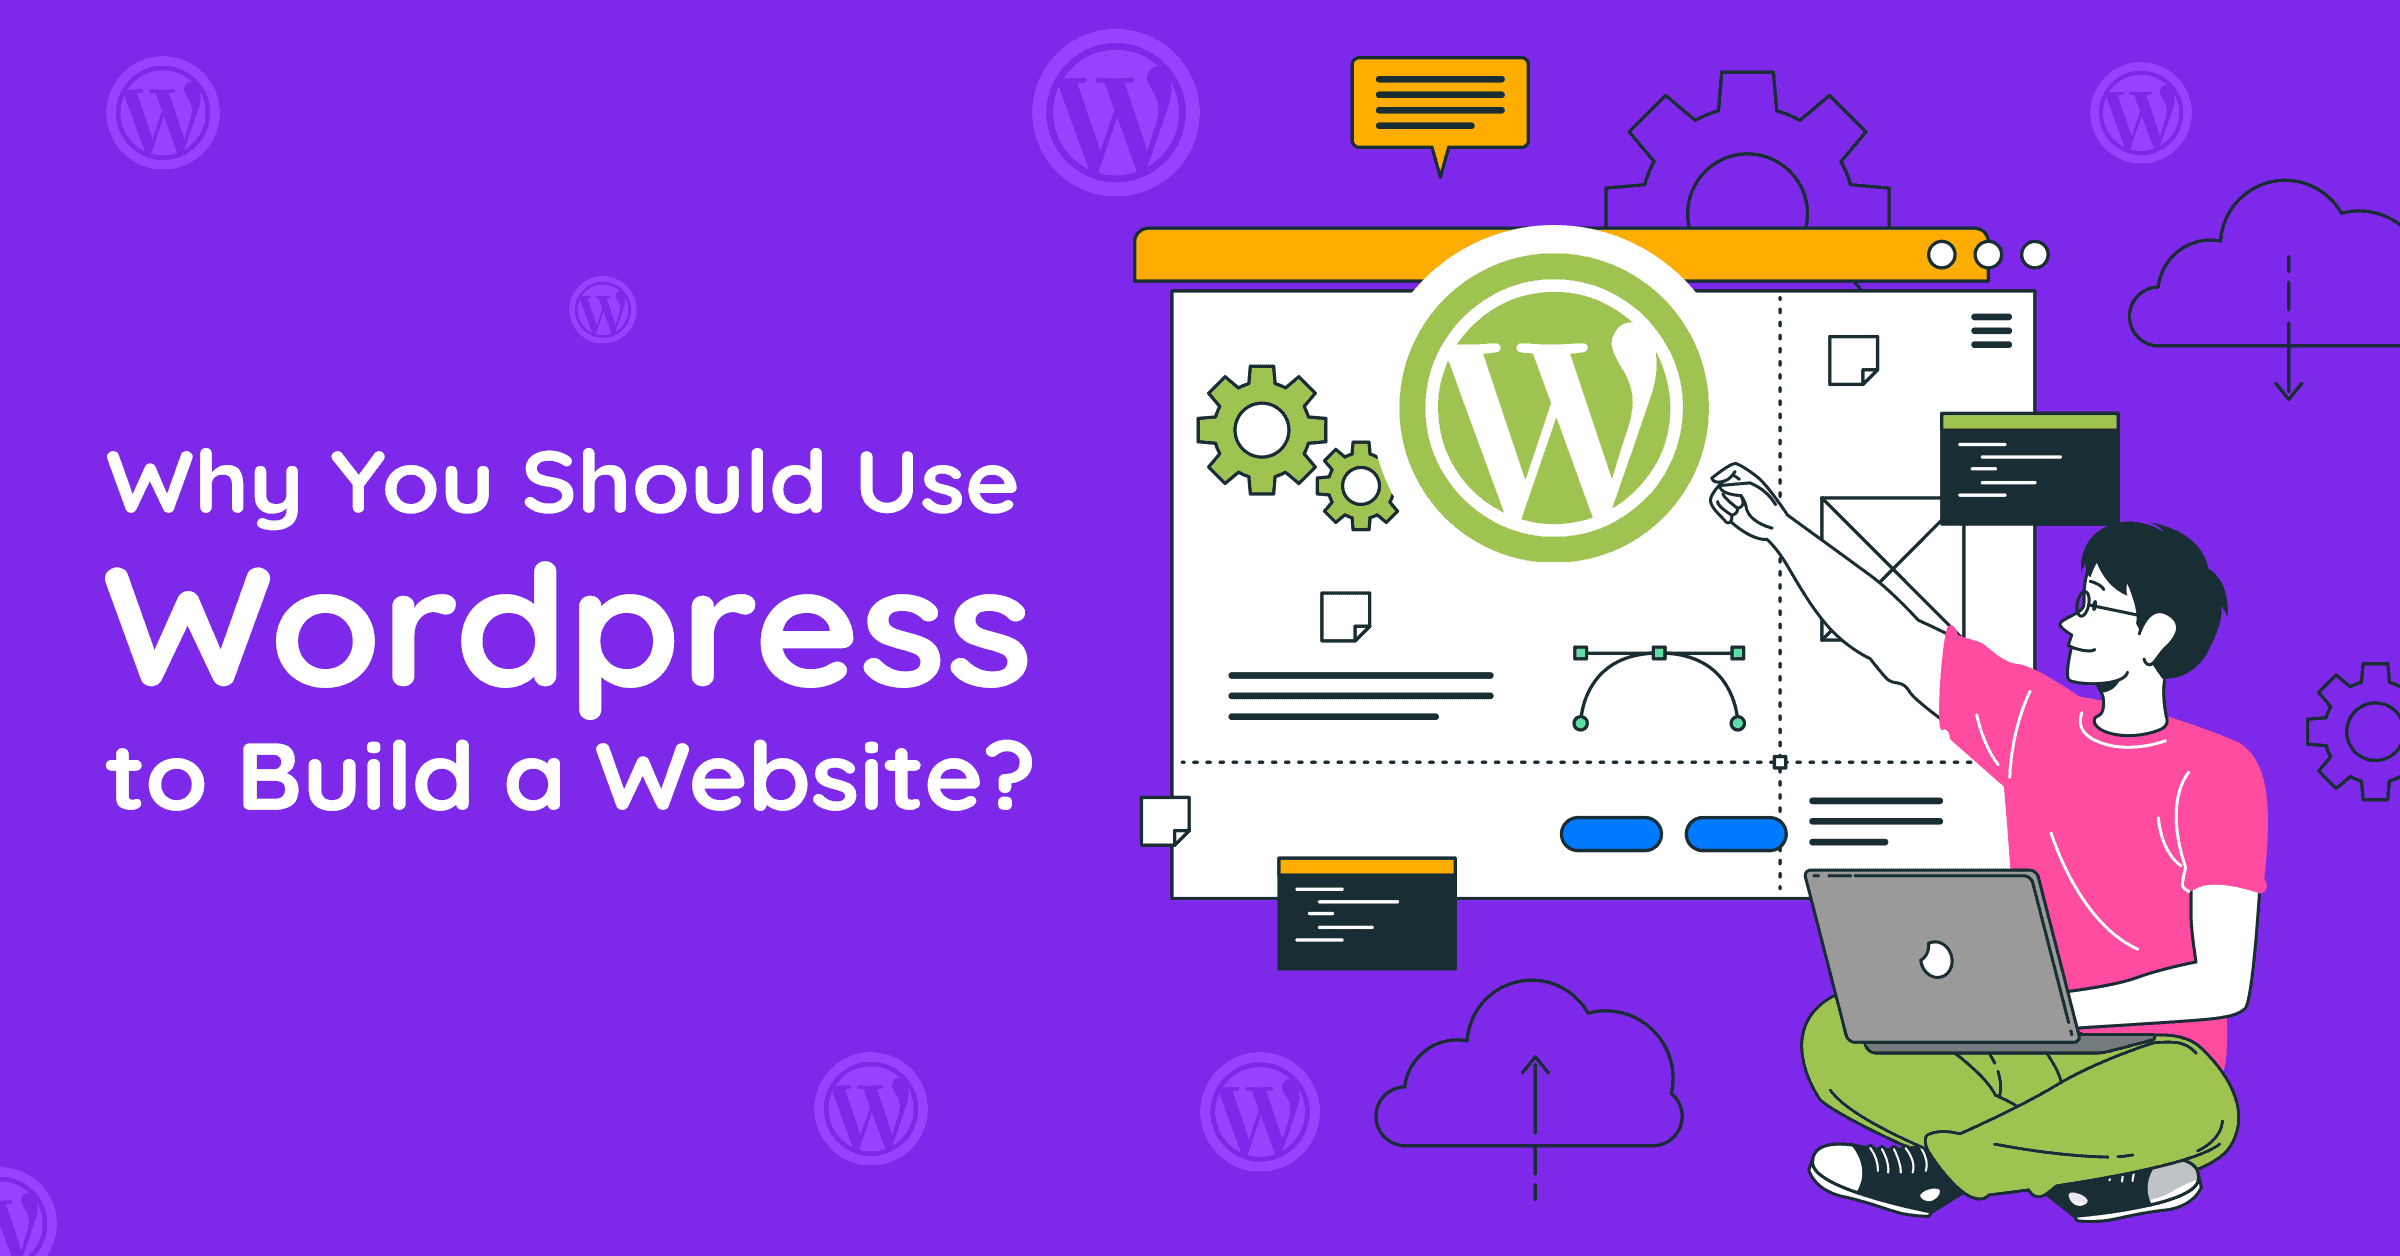 This is the cover image of our blog which lists down 11 reasons why you should use WordPress for website development